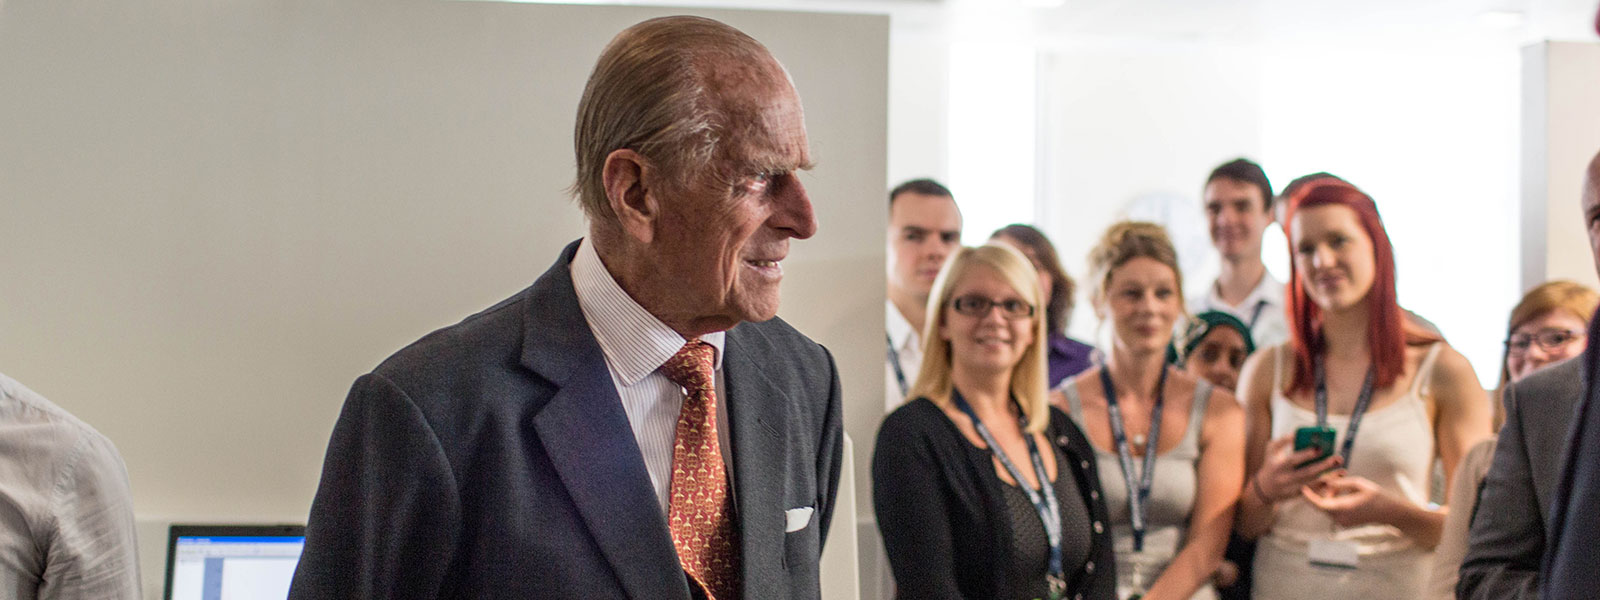 The Duke of Edinburgh meets with young researchers in the Technology & Innovation Centre.